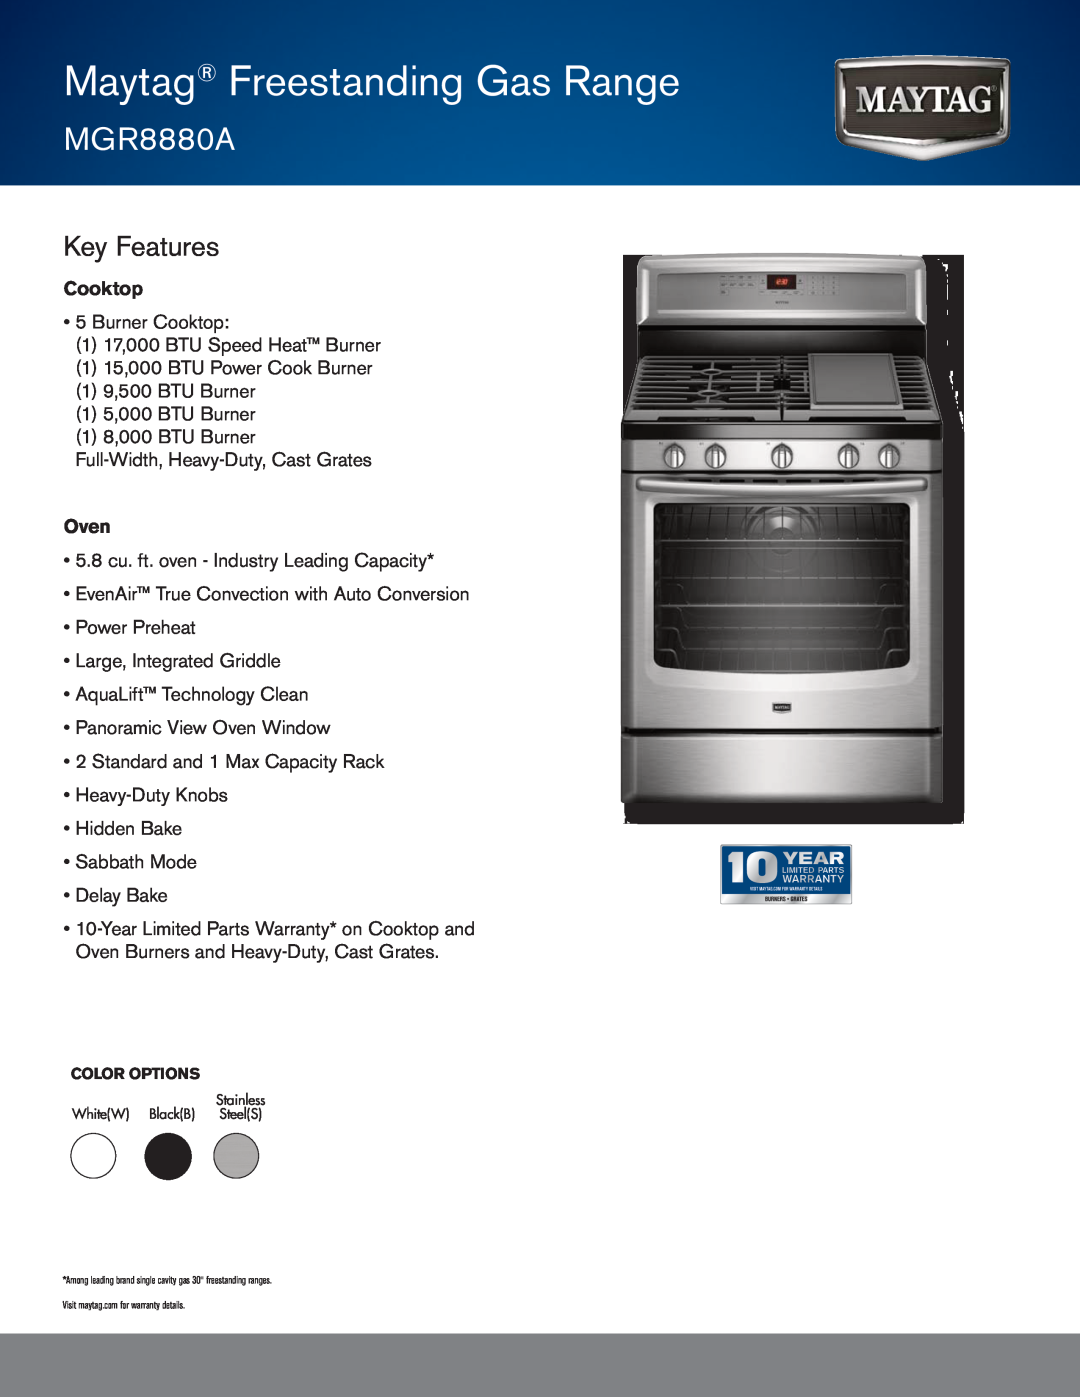 Maytag MGR8880A warranty Maytag Freestanding Gas Range, mgr8880a, Key Features, Cooktop, Oven 